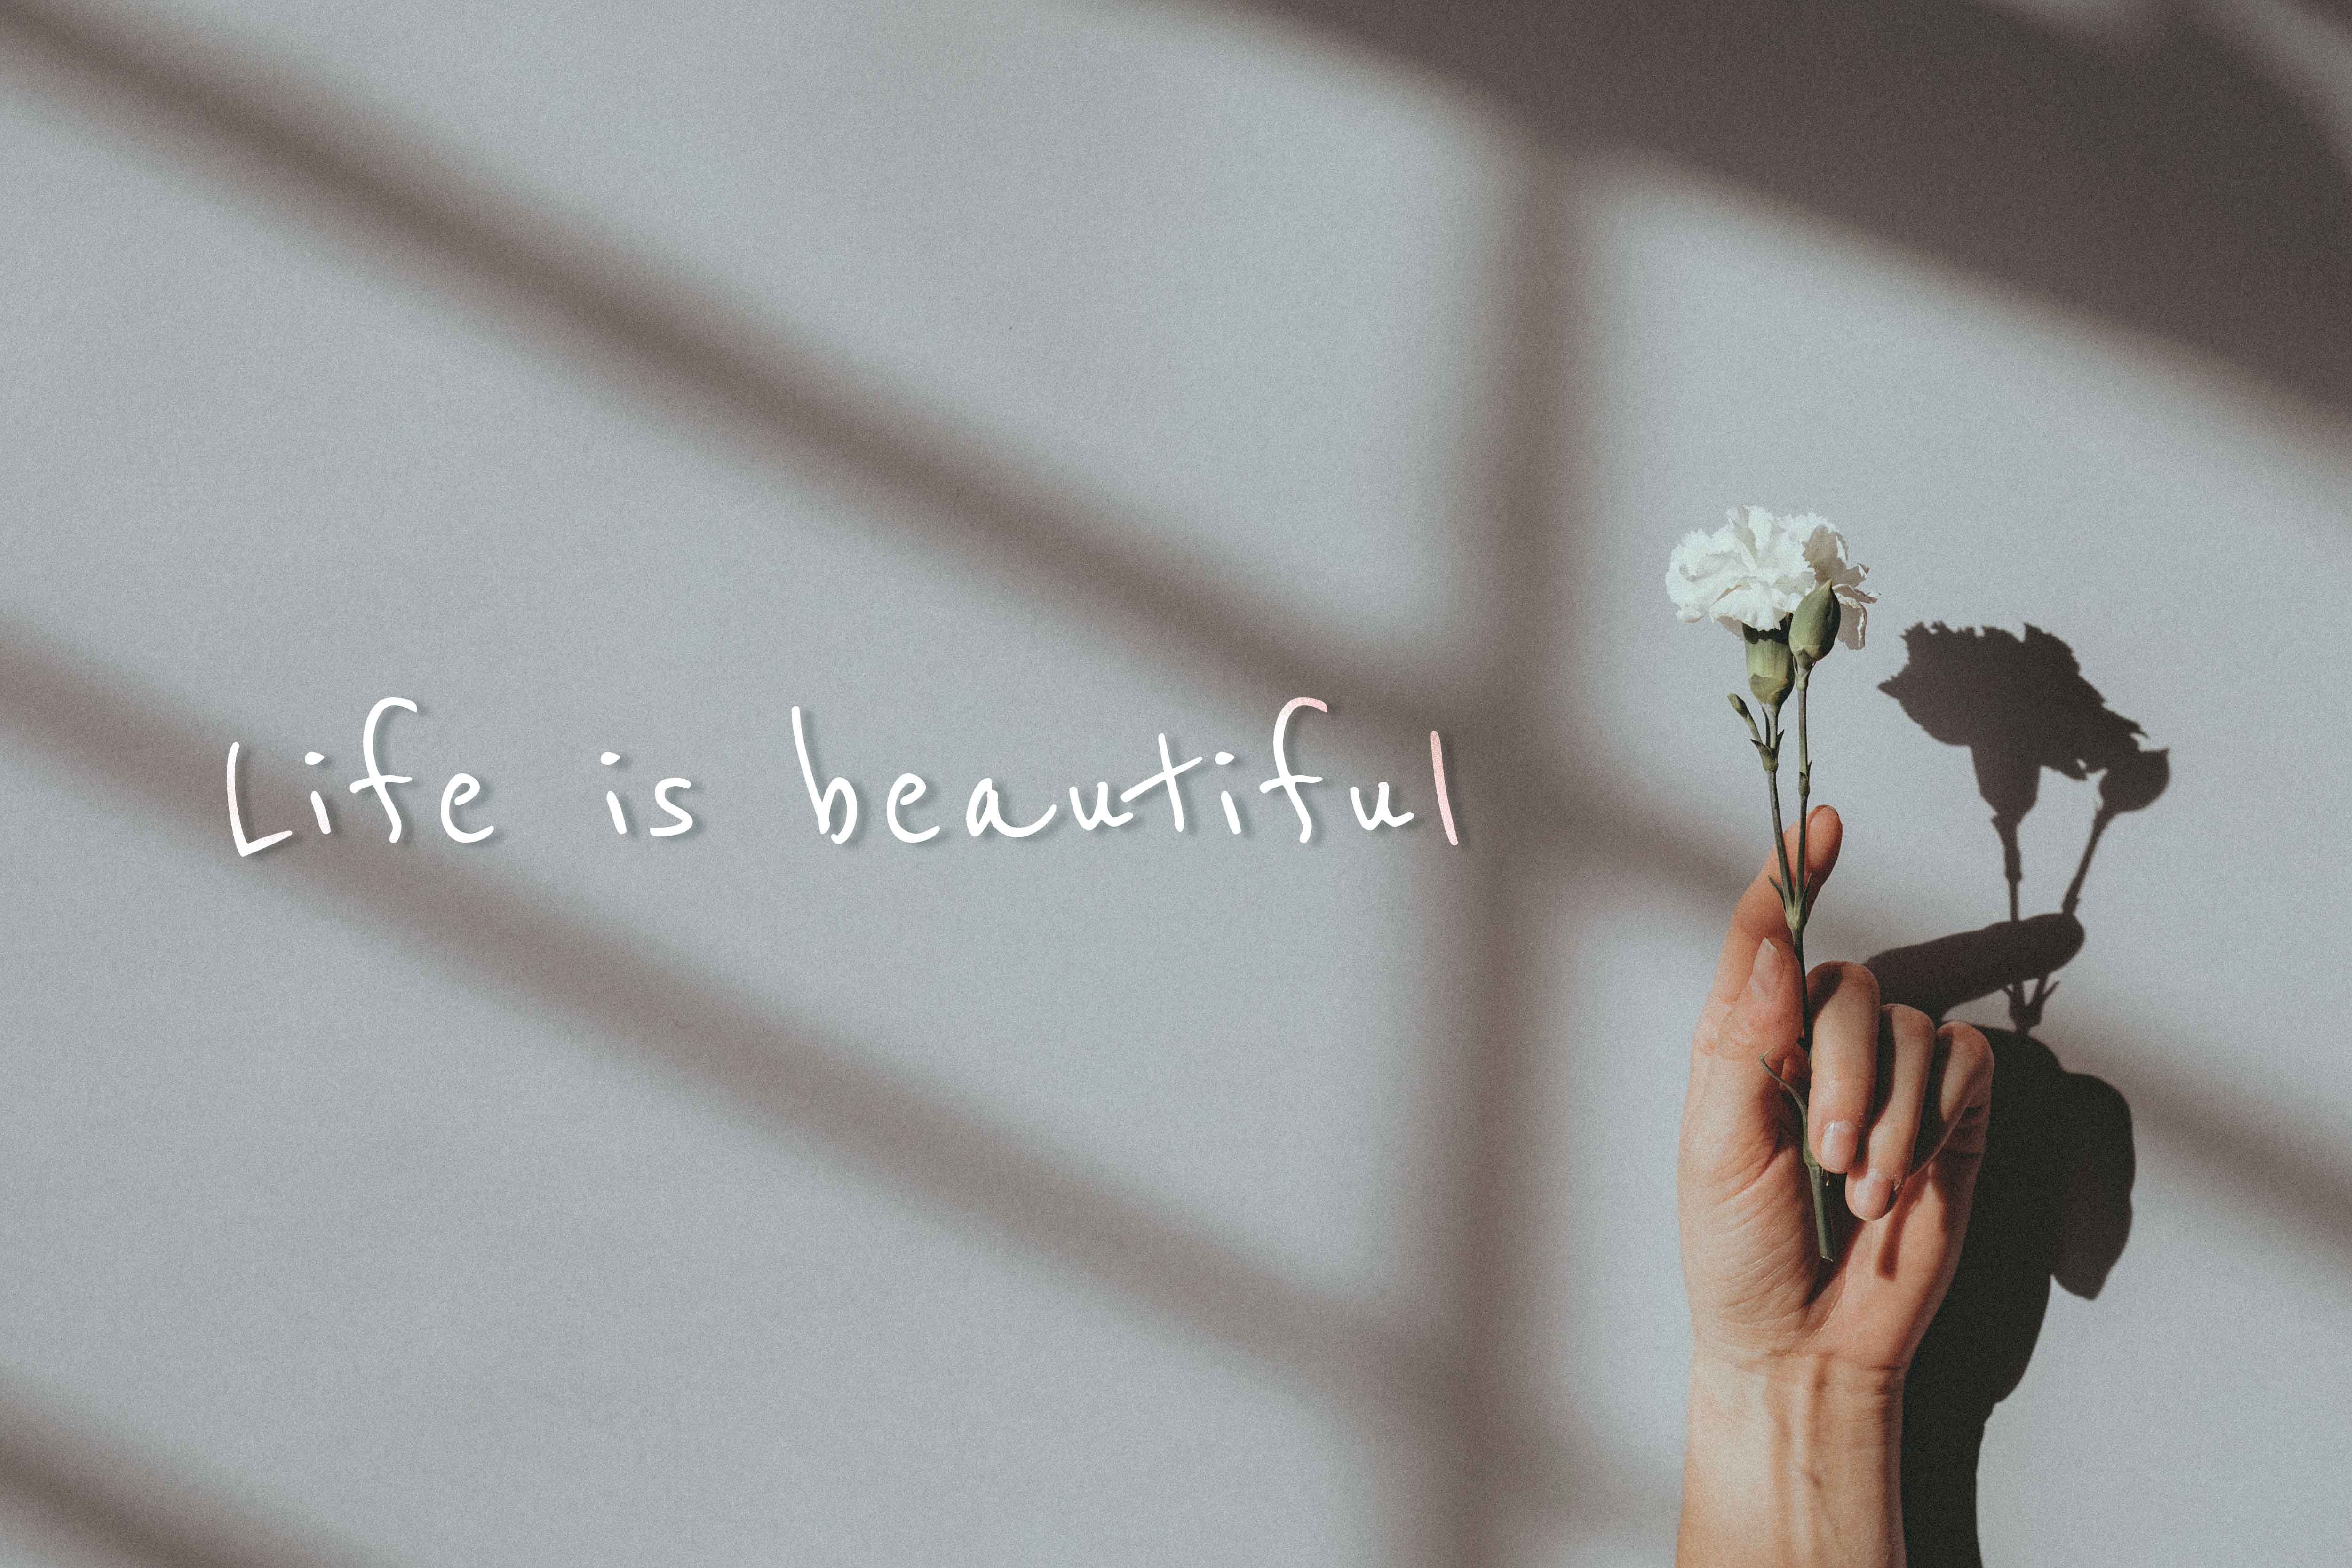 life-is-beautiful-quote.jpg